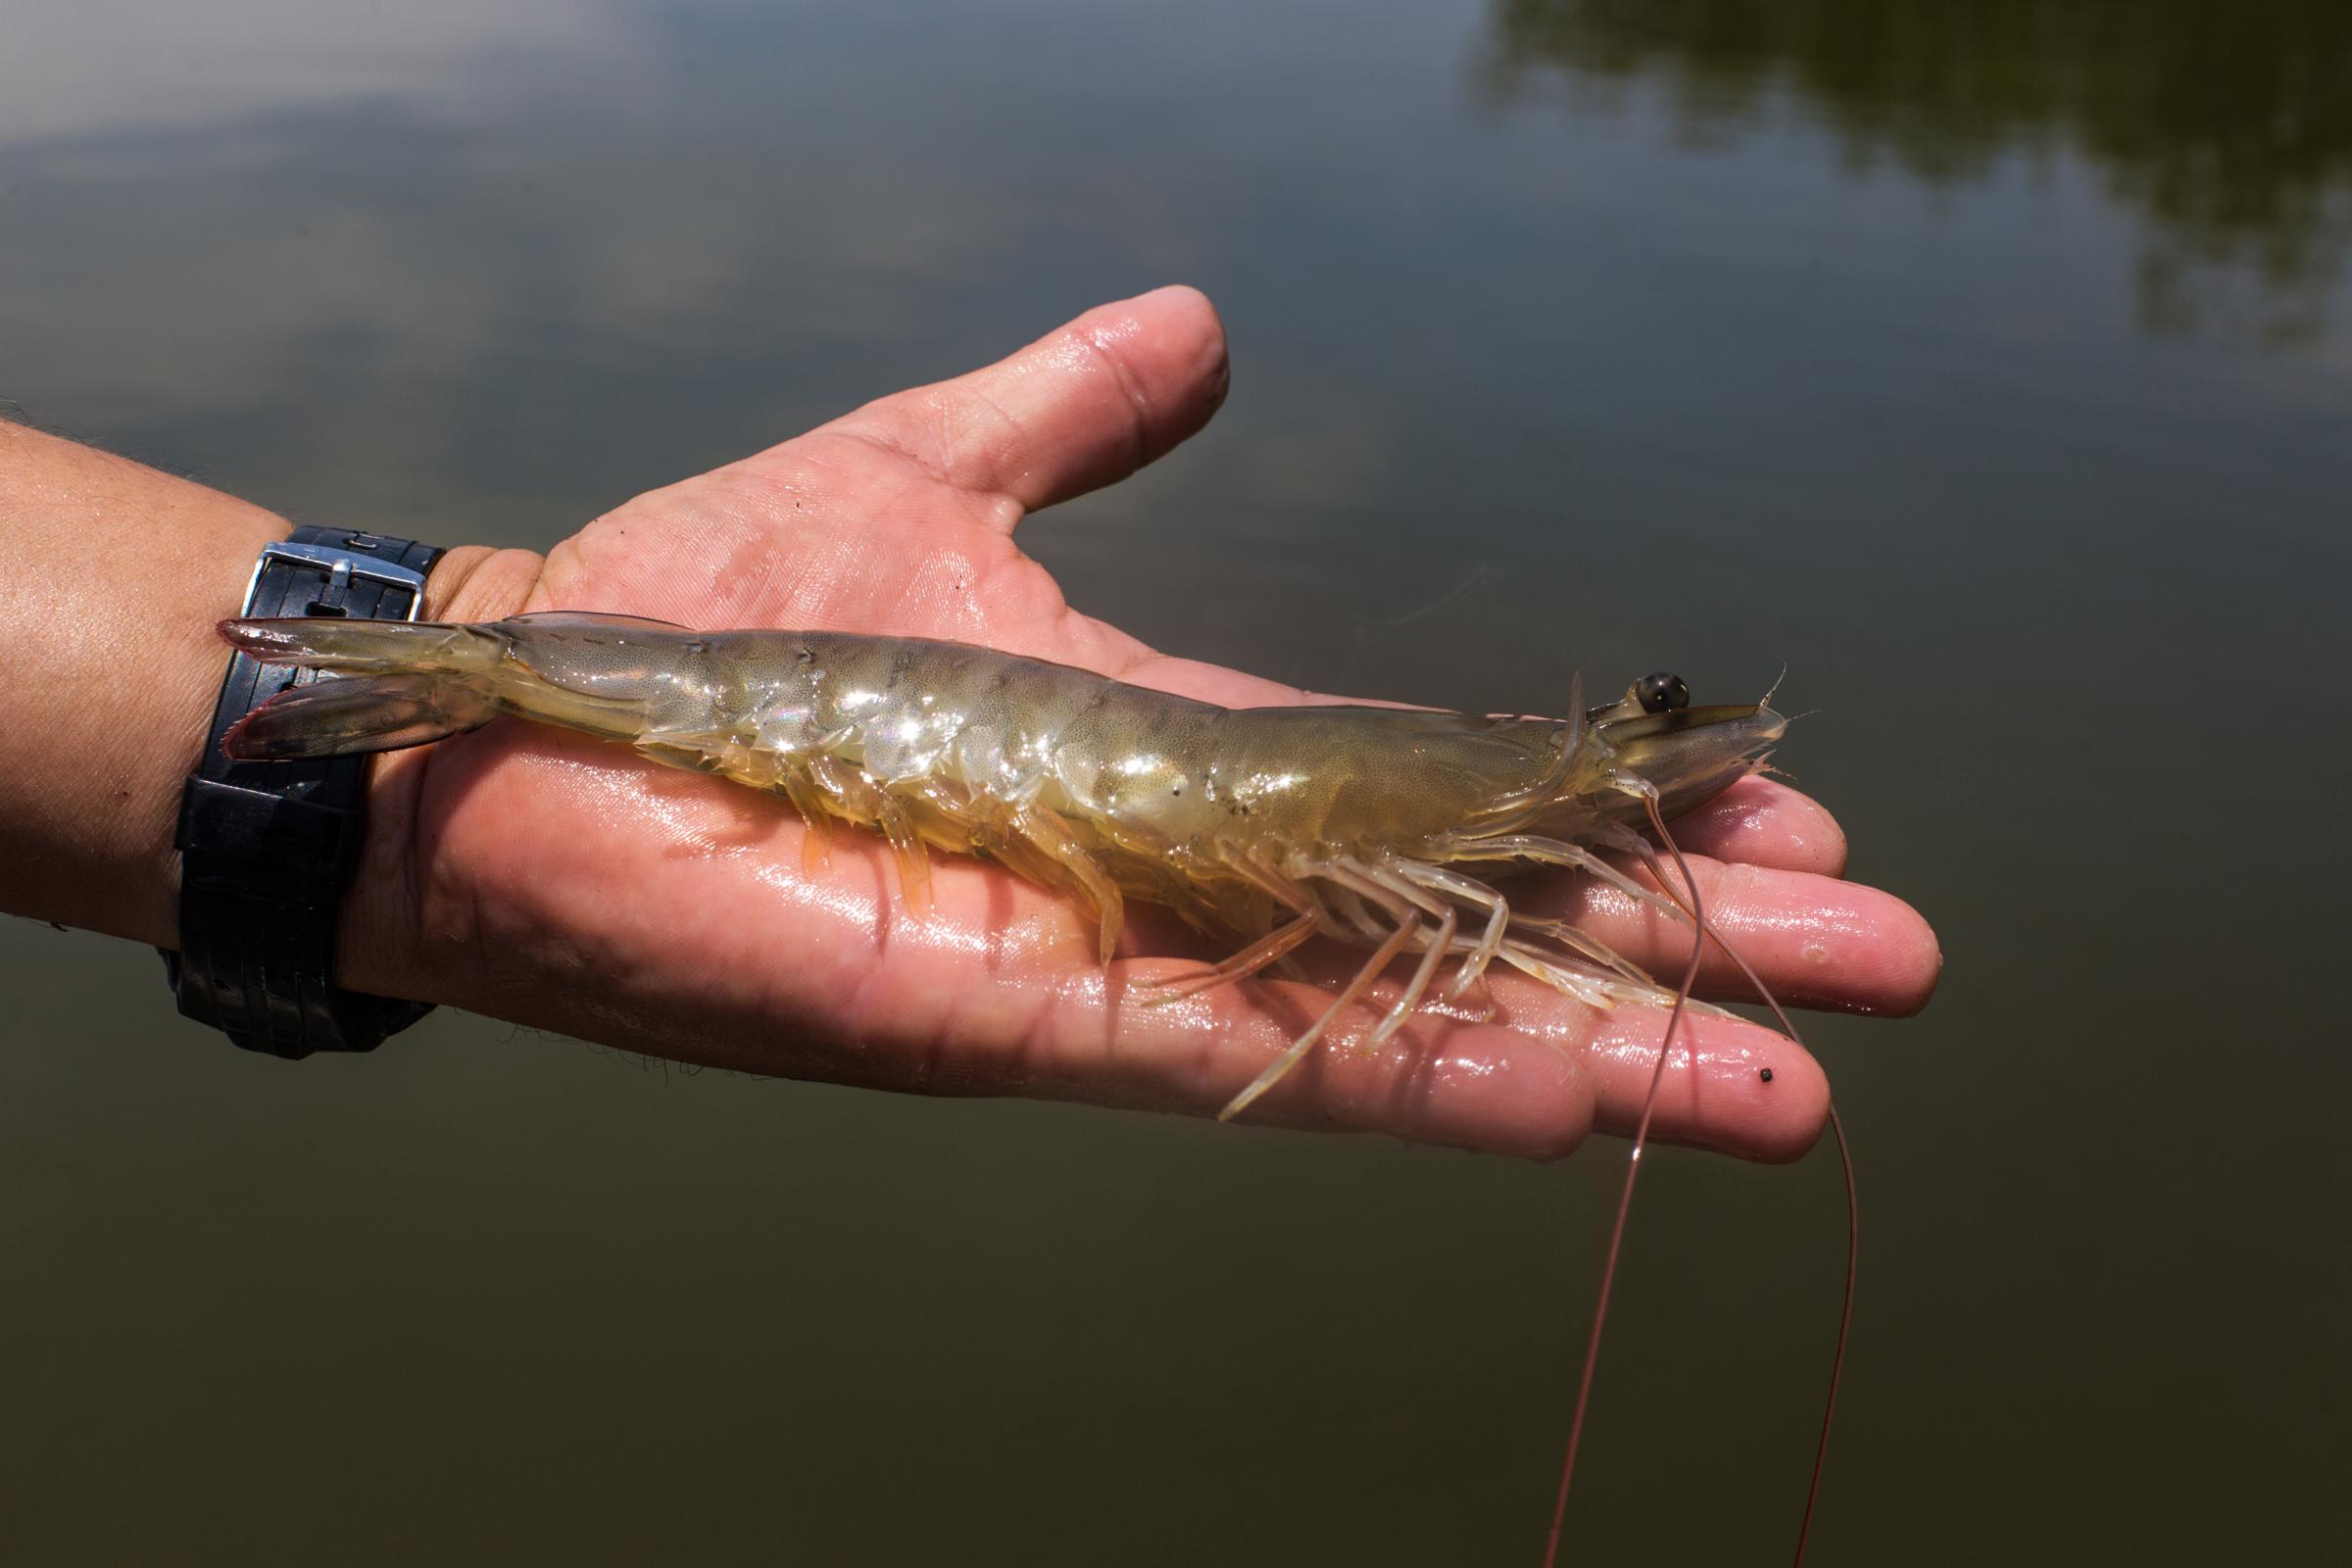 Shrimp product with negative effects of Russia’s invasion 